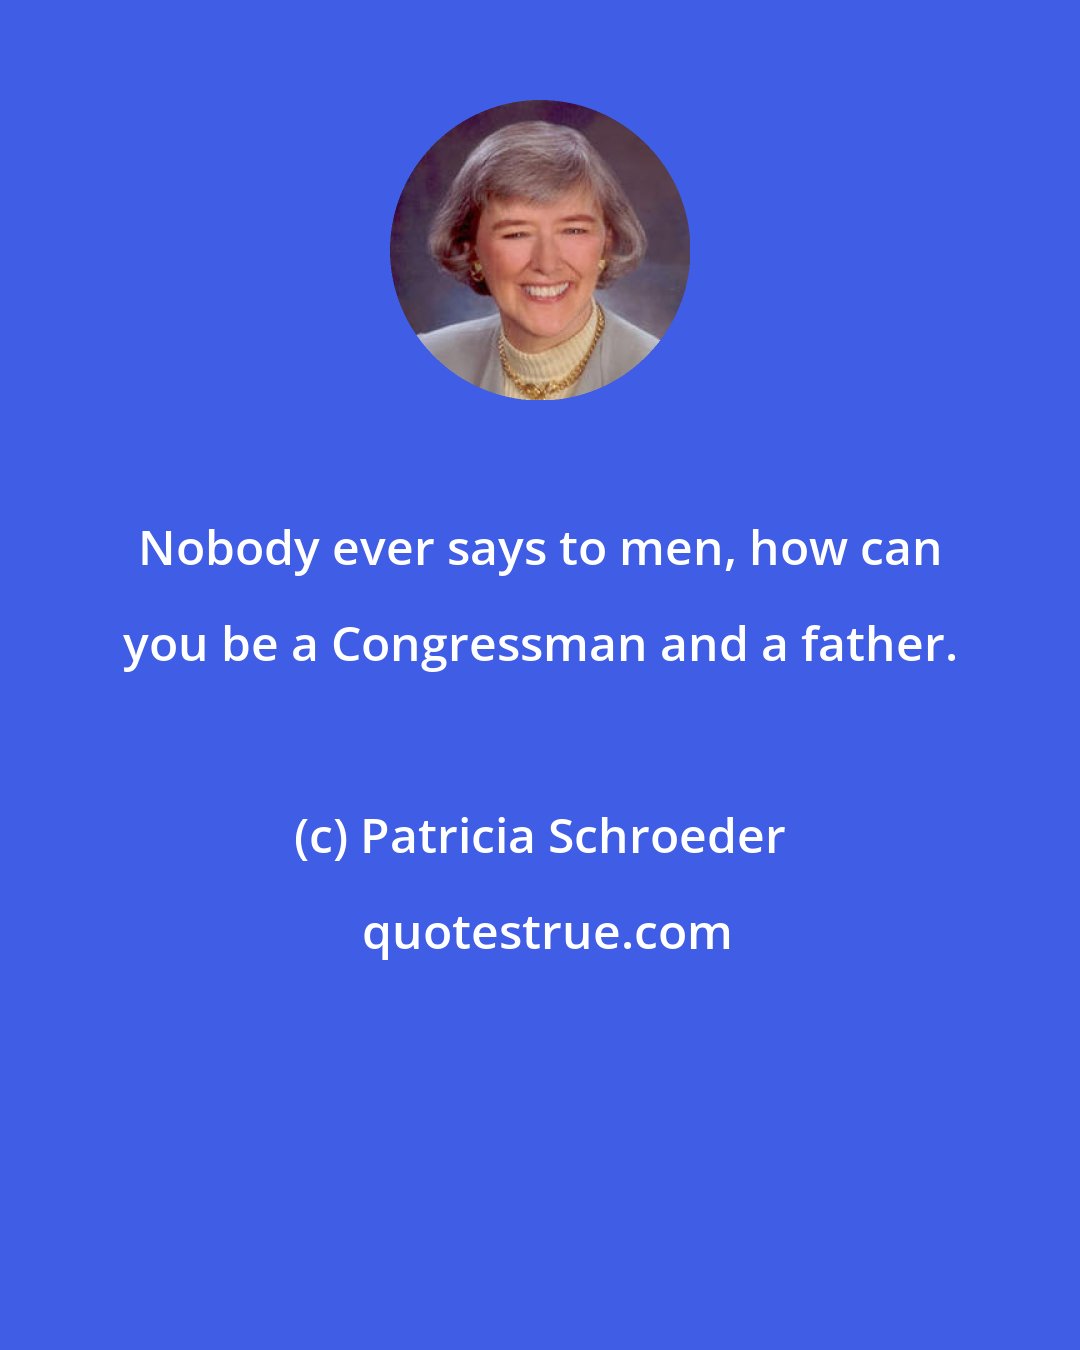 Patricia Schroeder: Nobody ever says to men, how can you be a Congressman and a father.